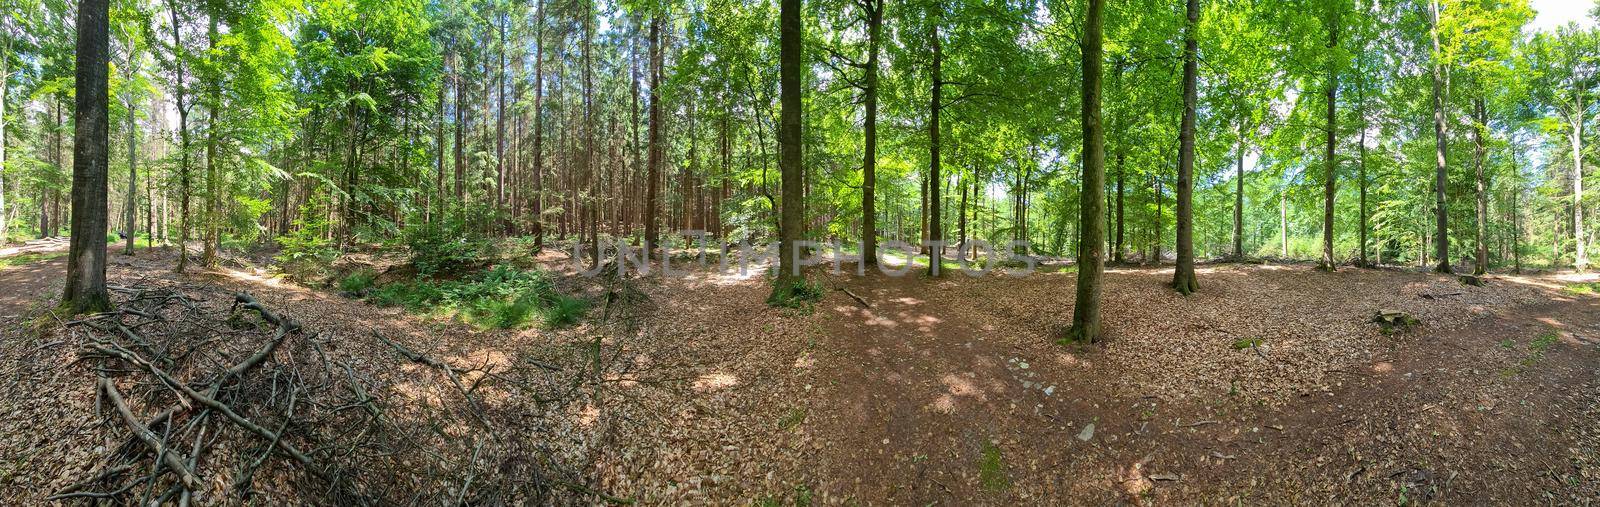 Panorama of a beautiful view into a dense green forest with bright sunlight casting deep shadow.